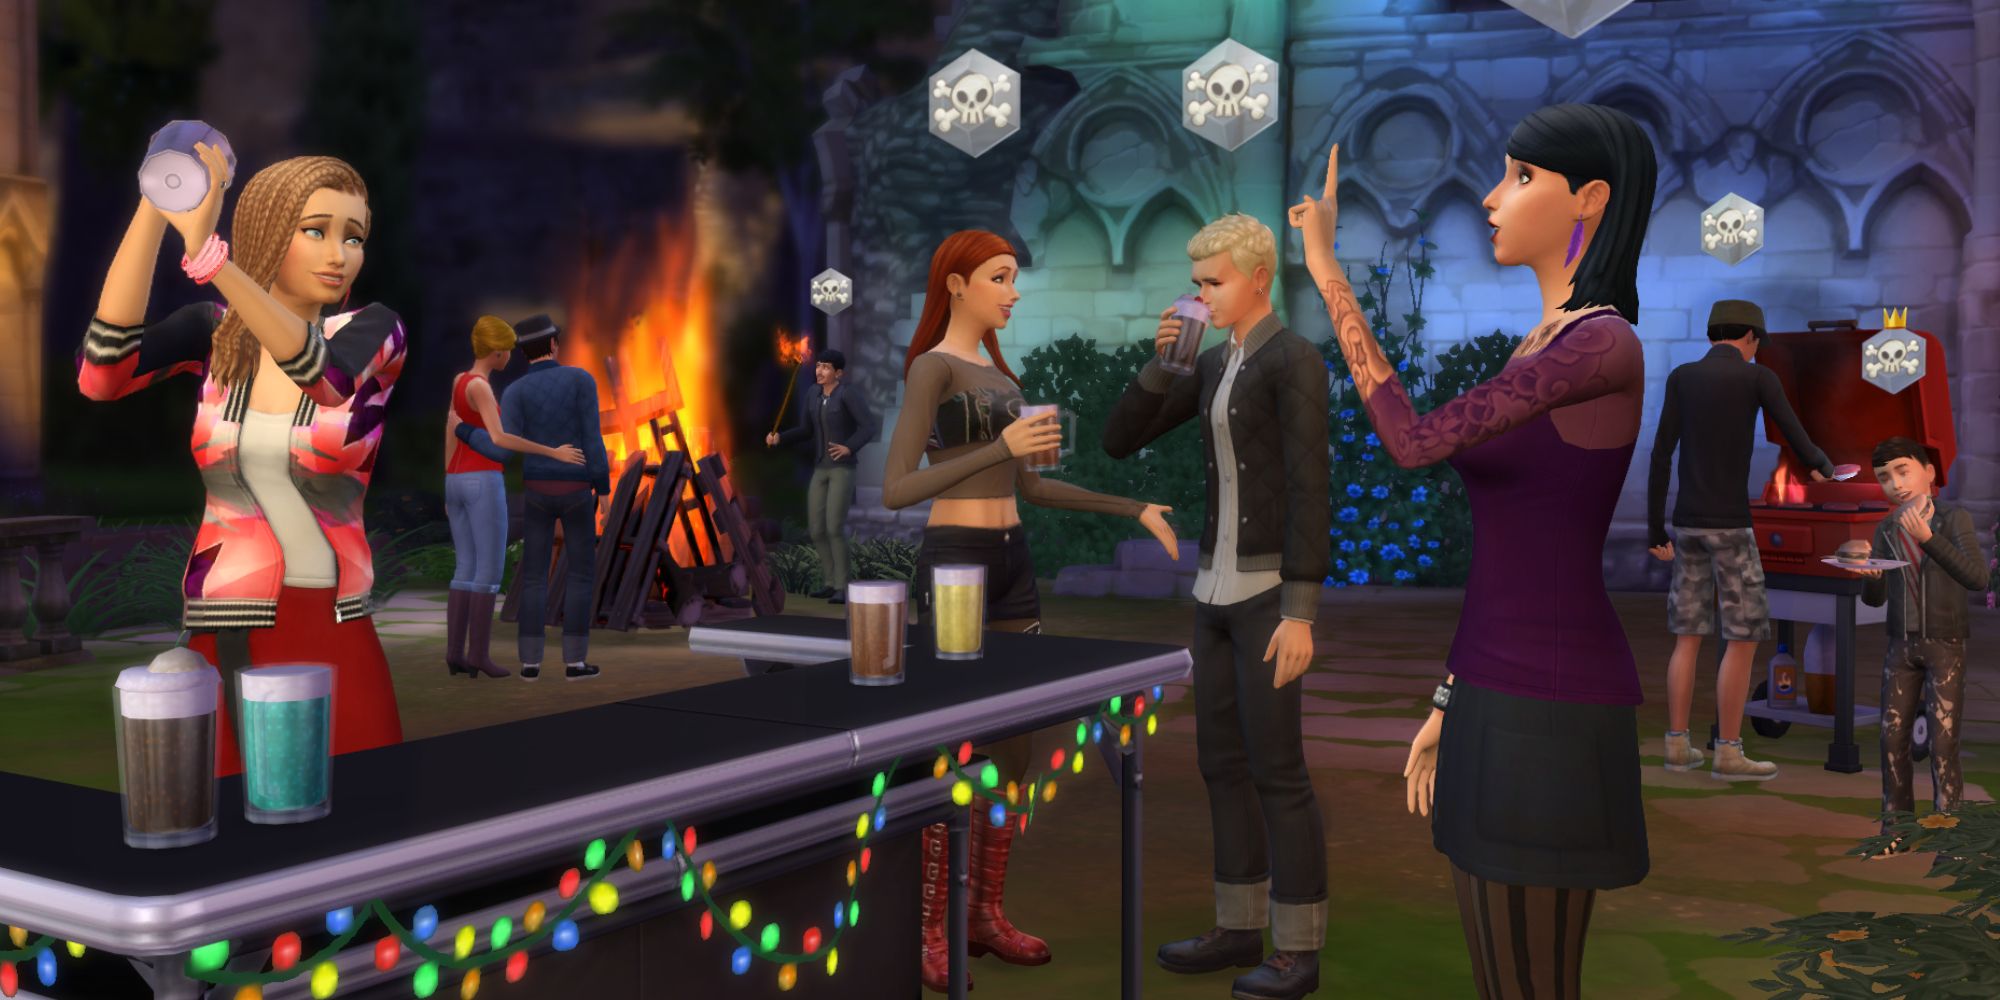 Sims 4 get together outdoor gathering